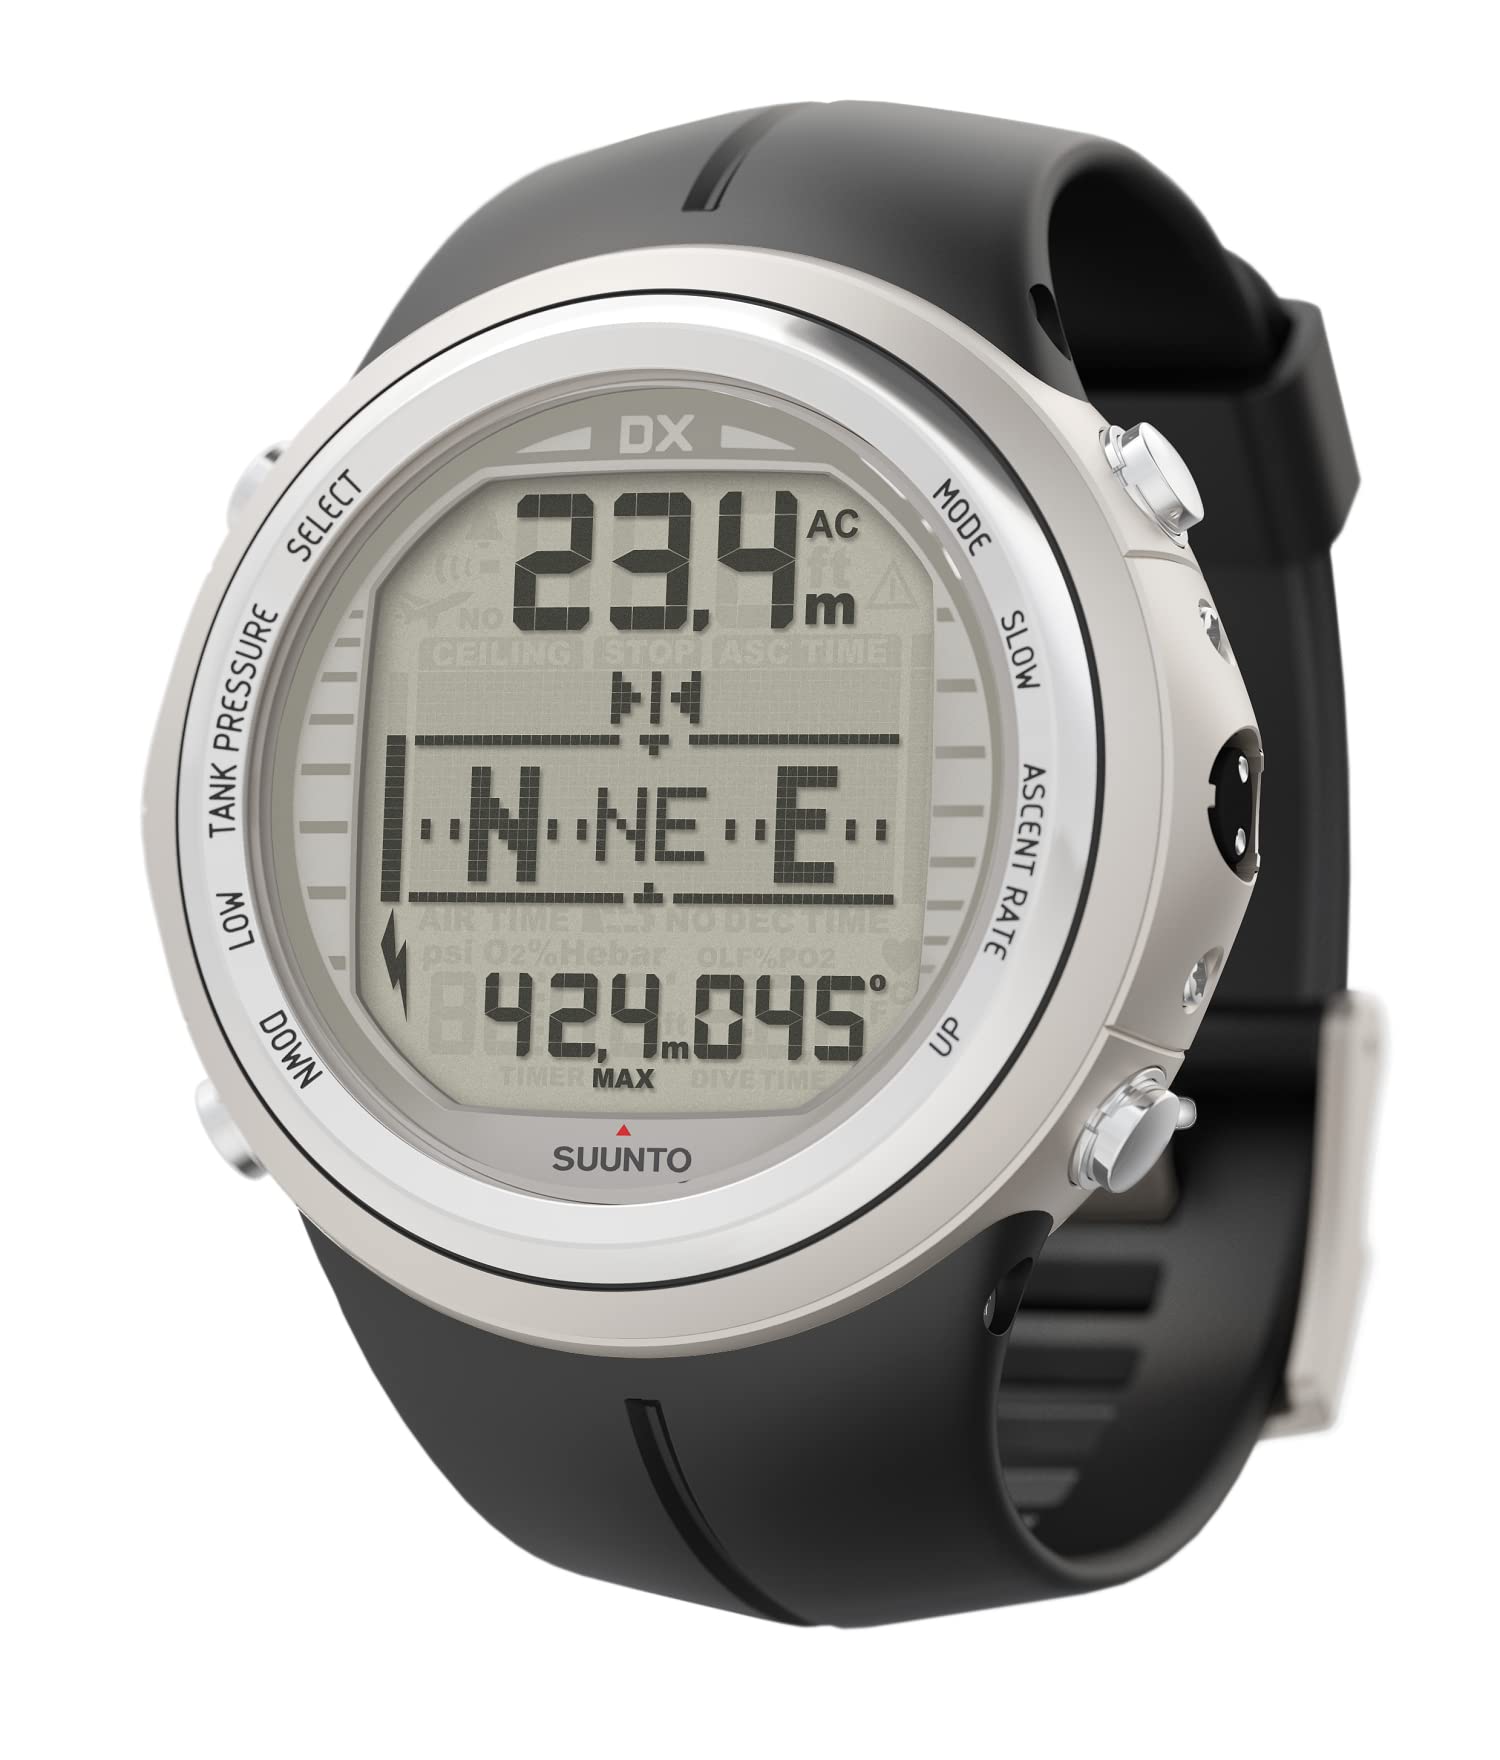 SUUNTO Dx Diving Watch with USB